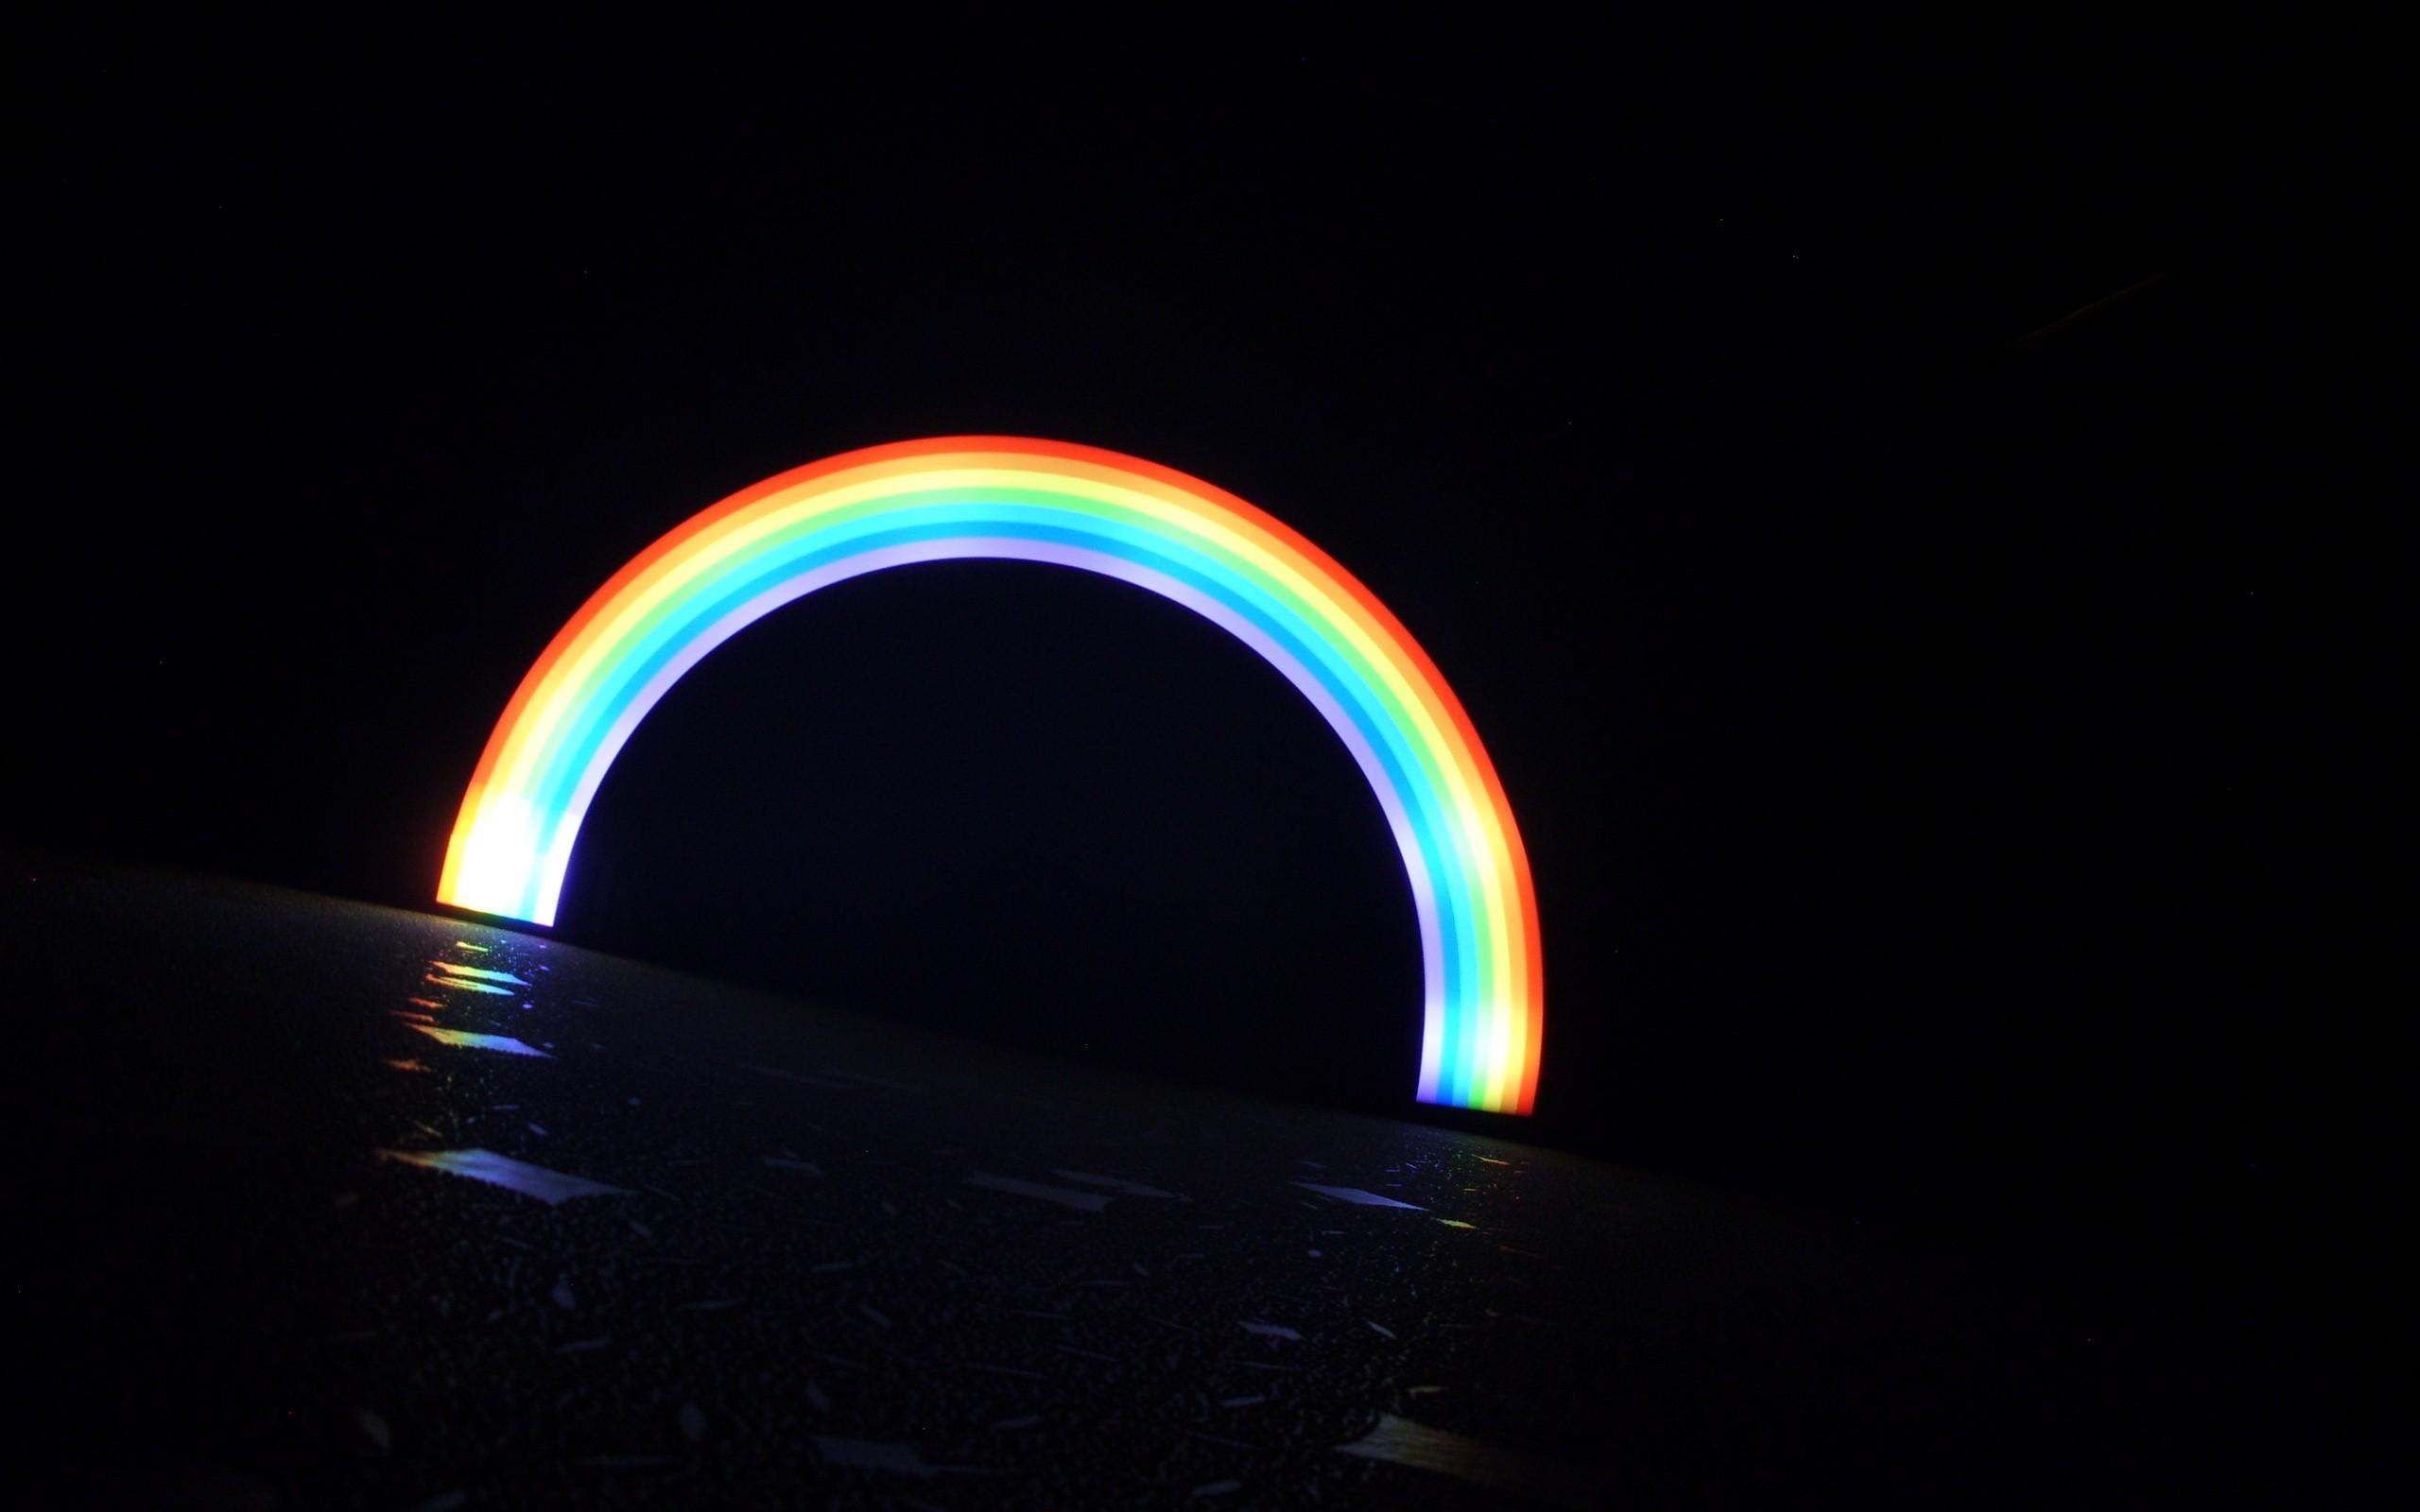 Download the LED Rainbow Wallpaper, LED Rainbow iPhone Wallpaper